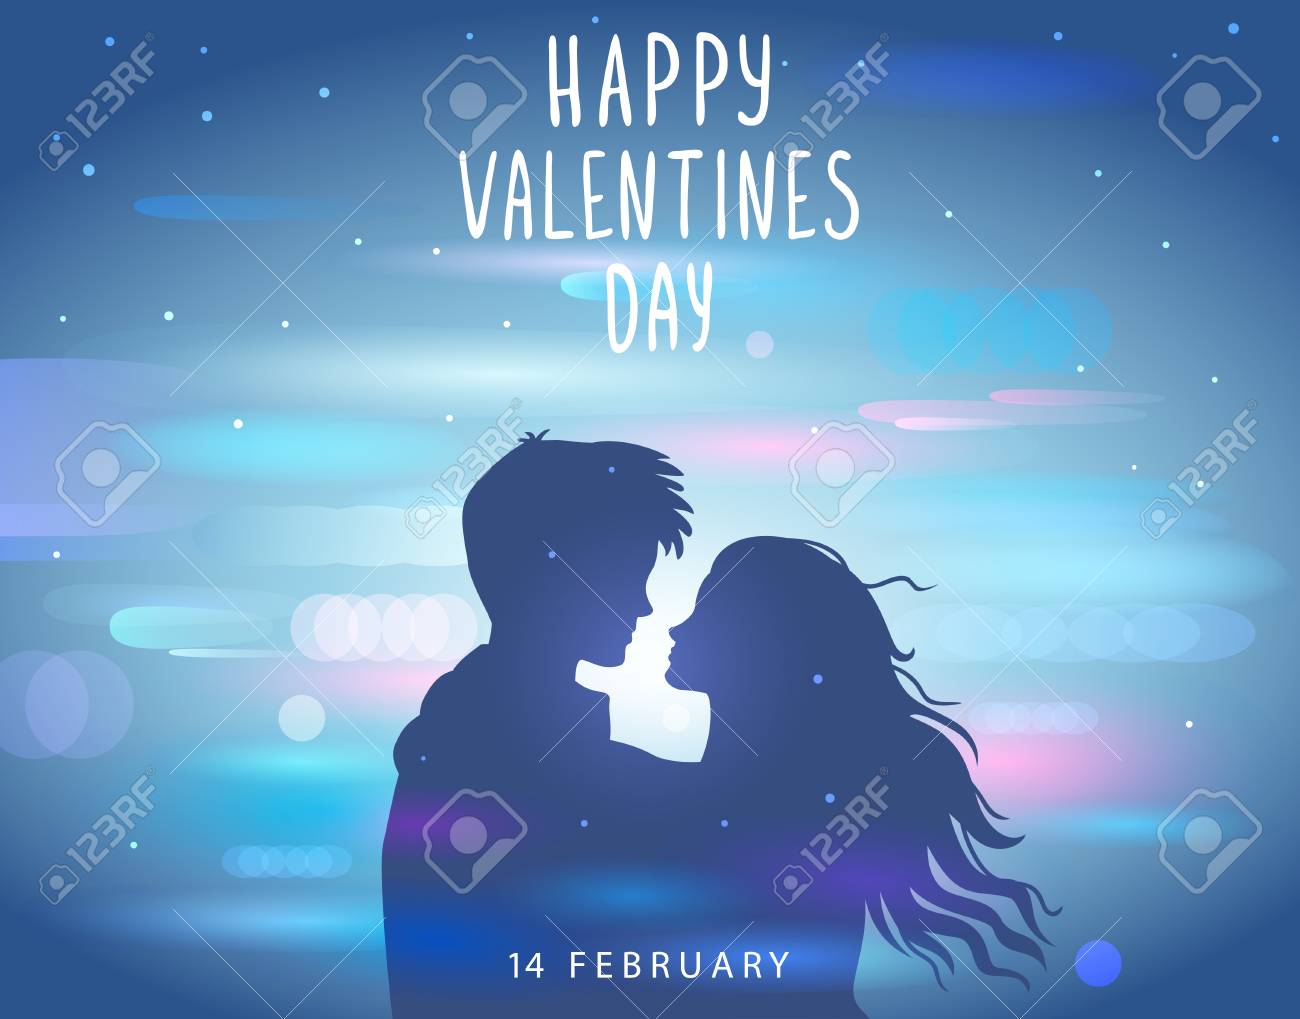 Romantic Silhouette Of Loving Couple At Night With Blur Background